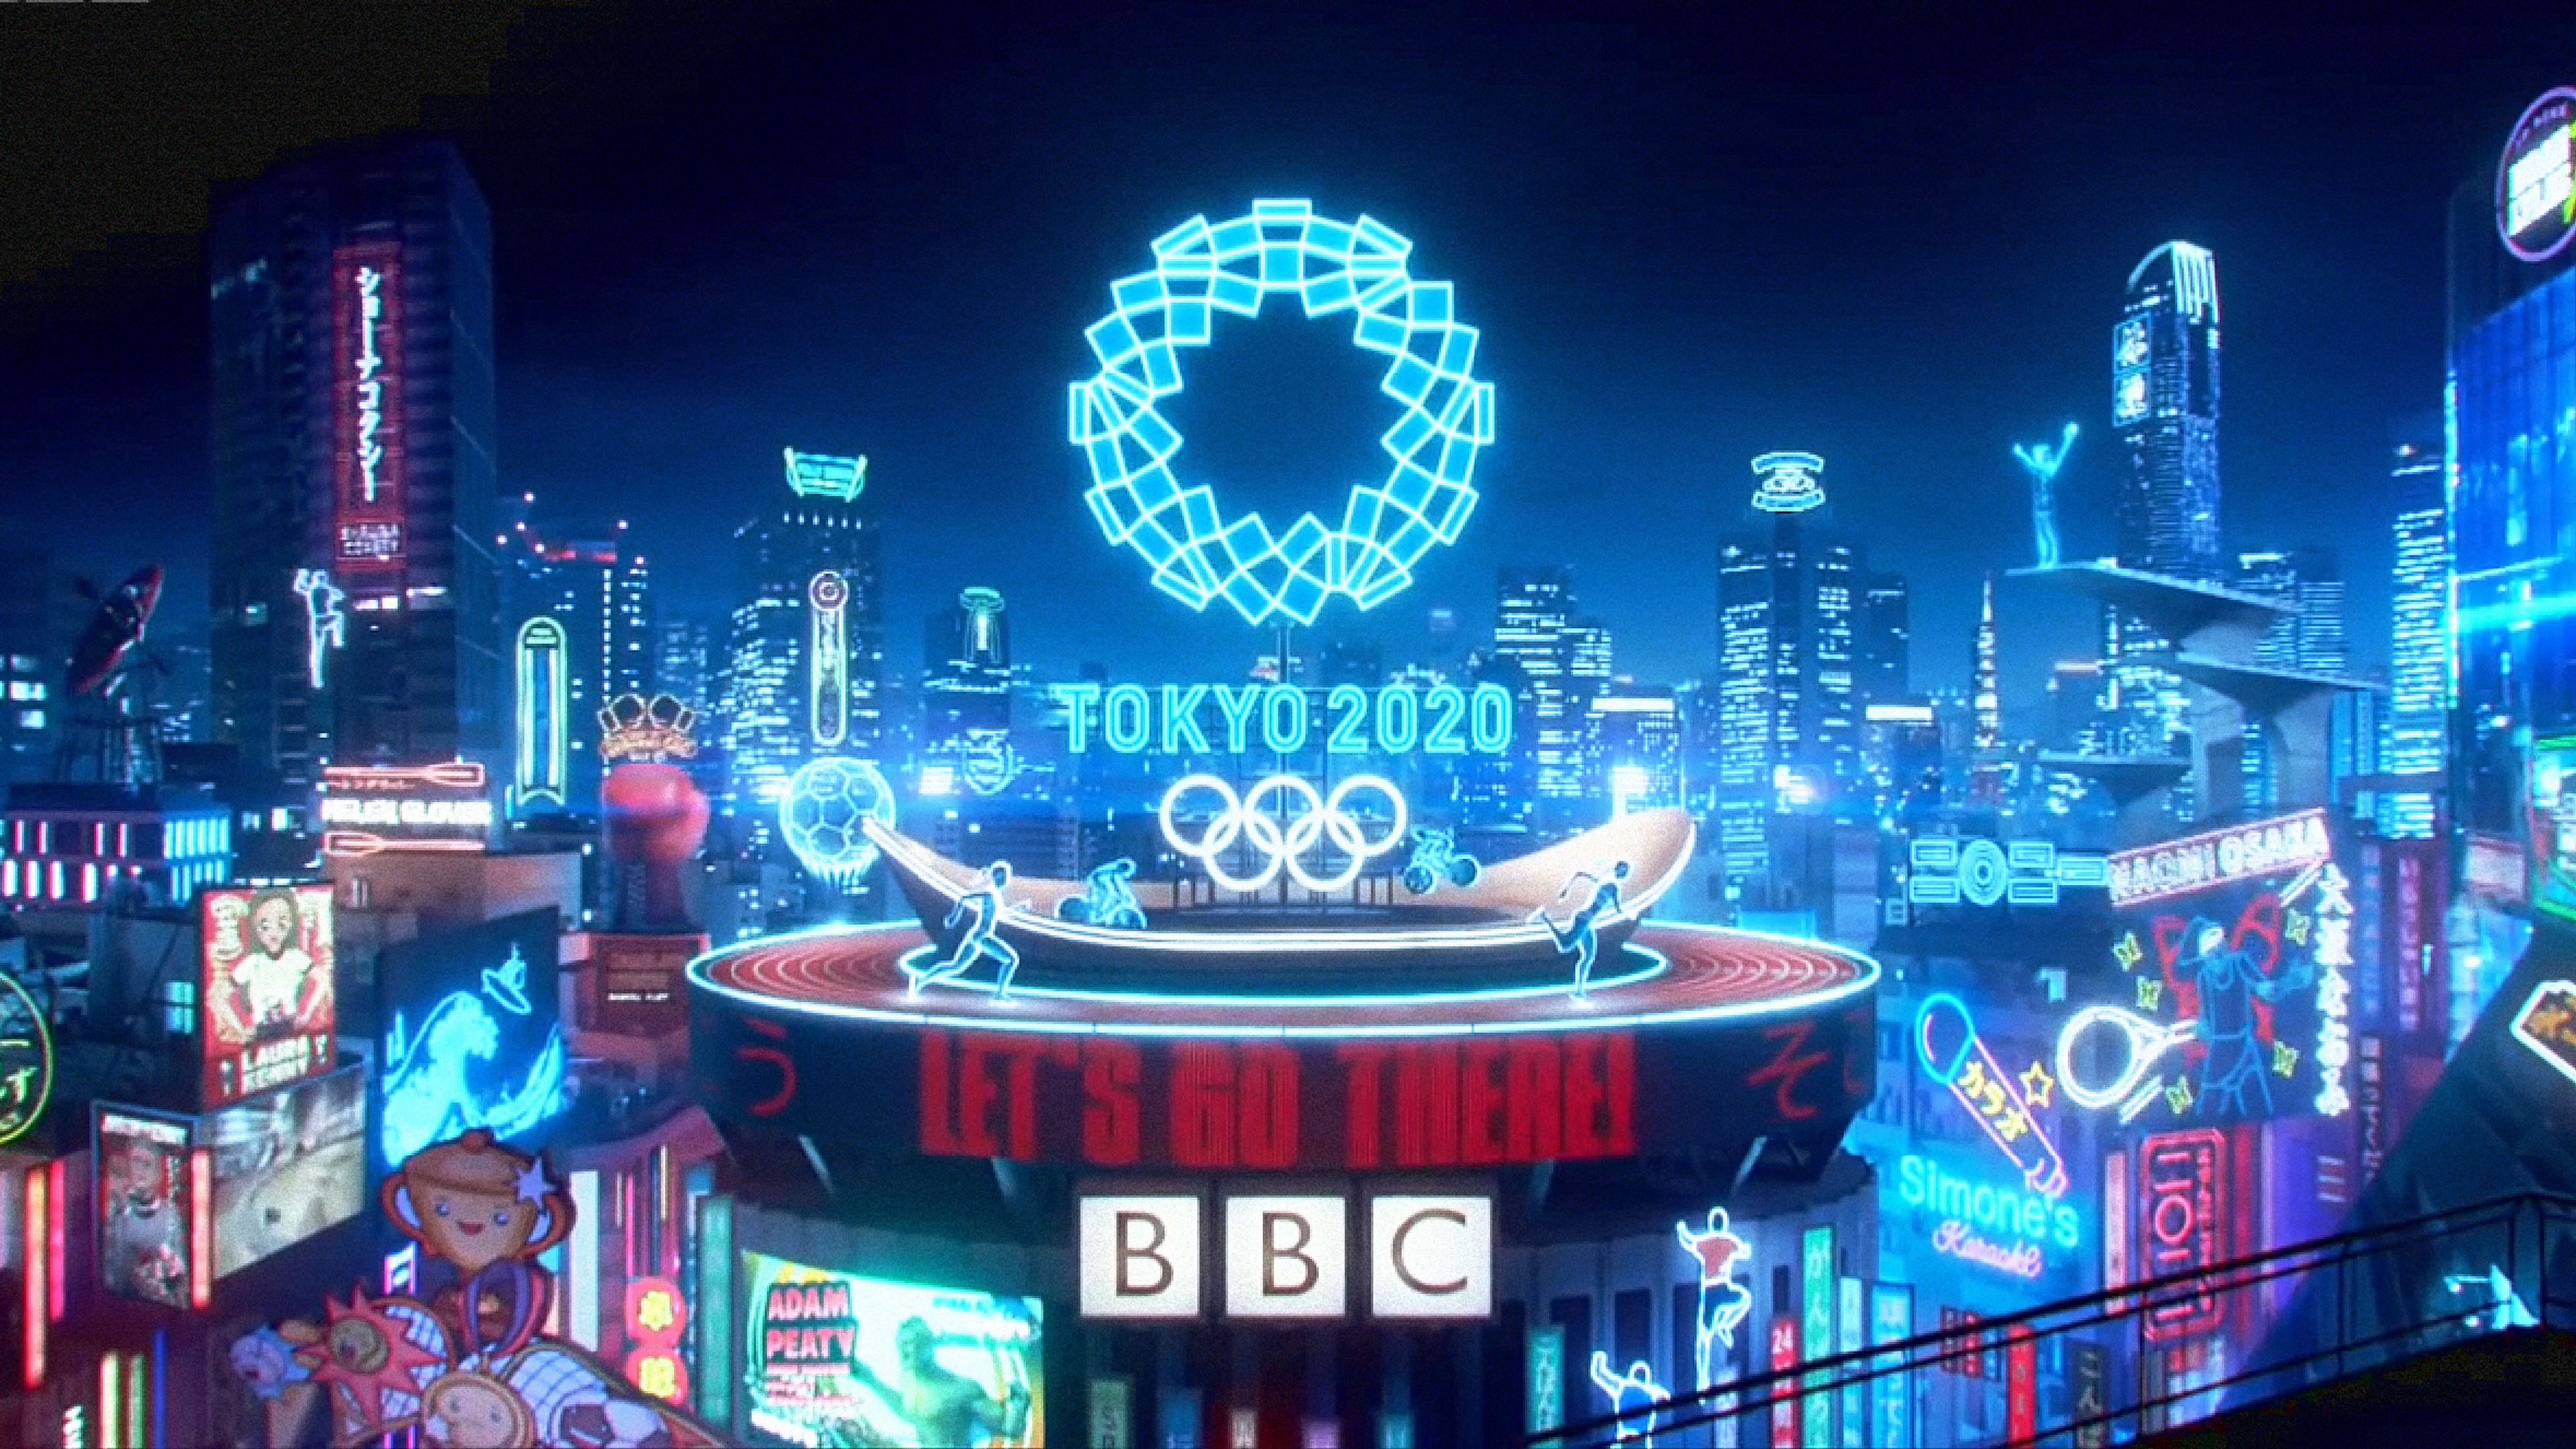 The playful branding of Tokyo 2020 ignores a darker truth